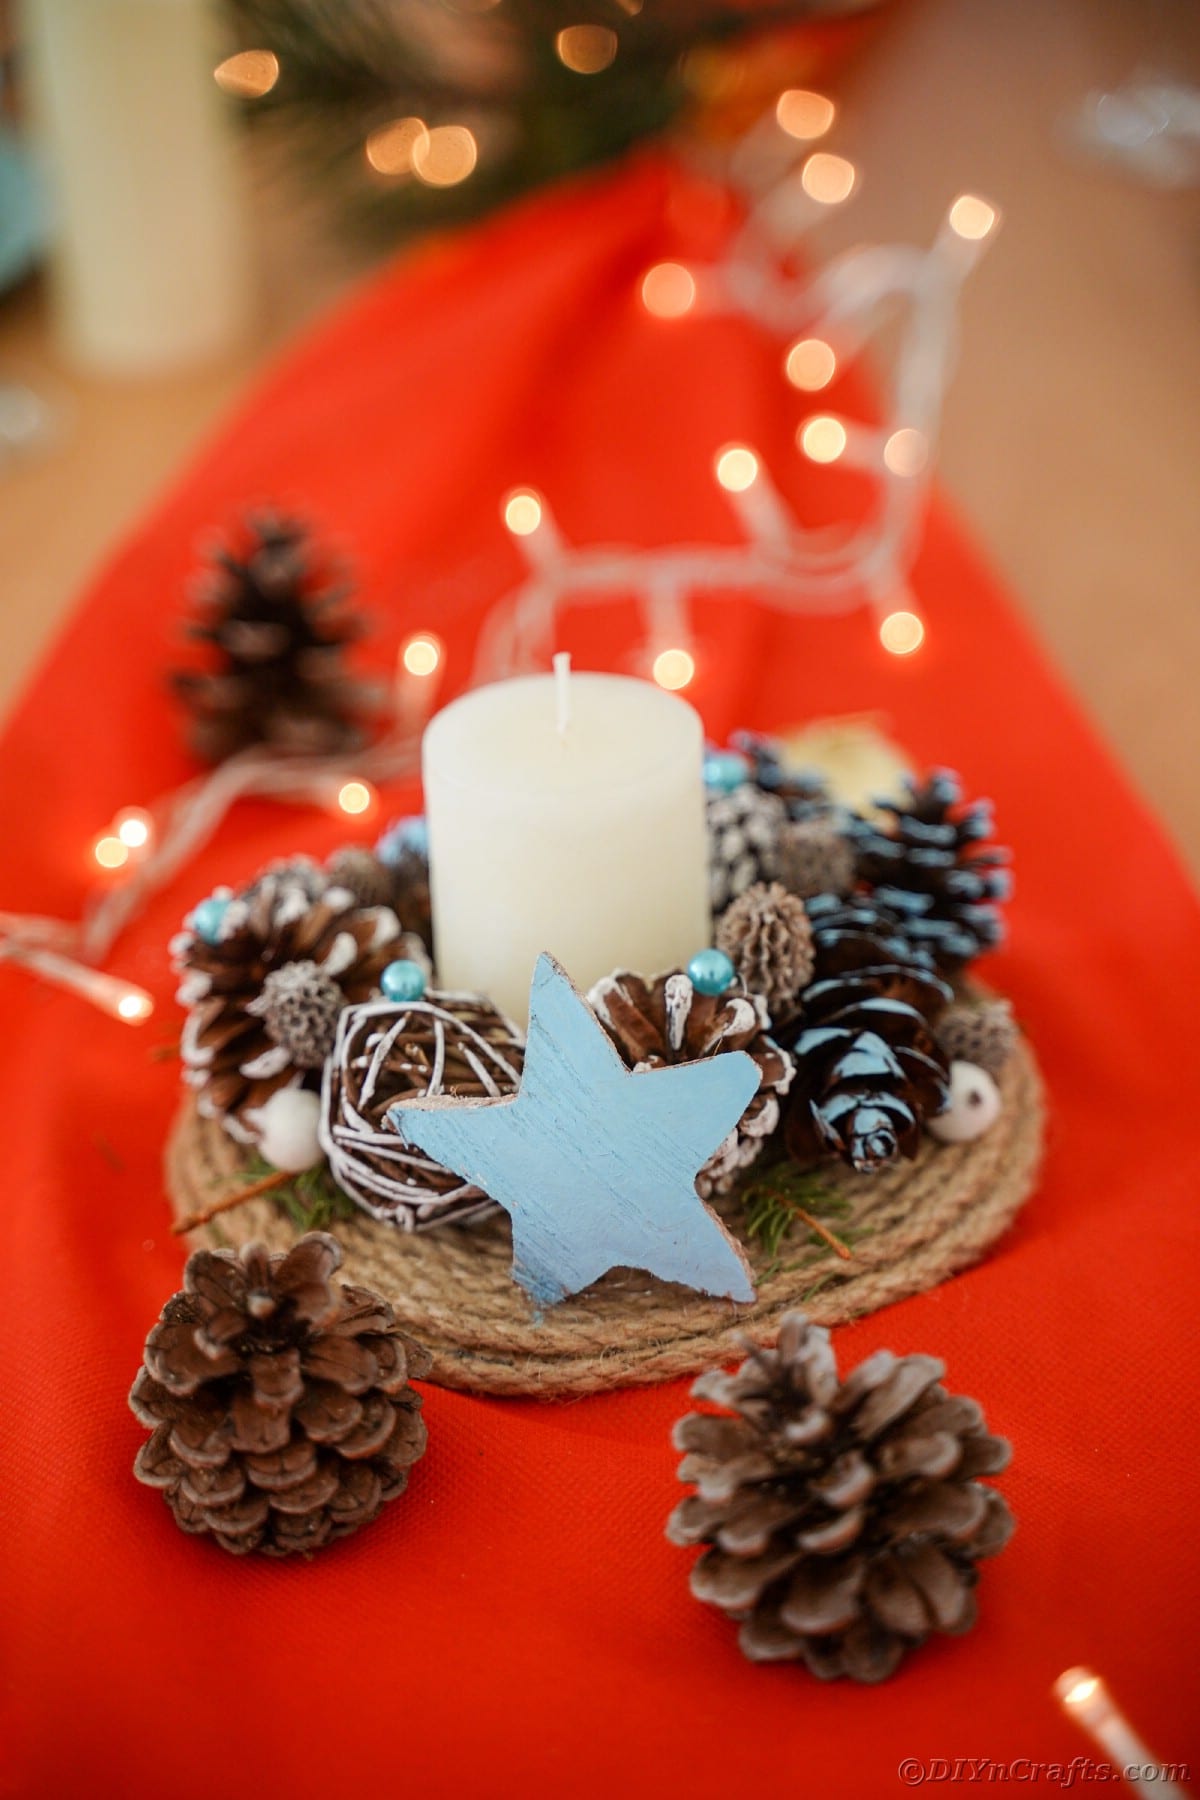 pinecone and star candle holder on red fabric